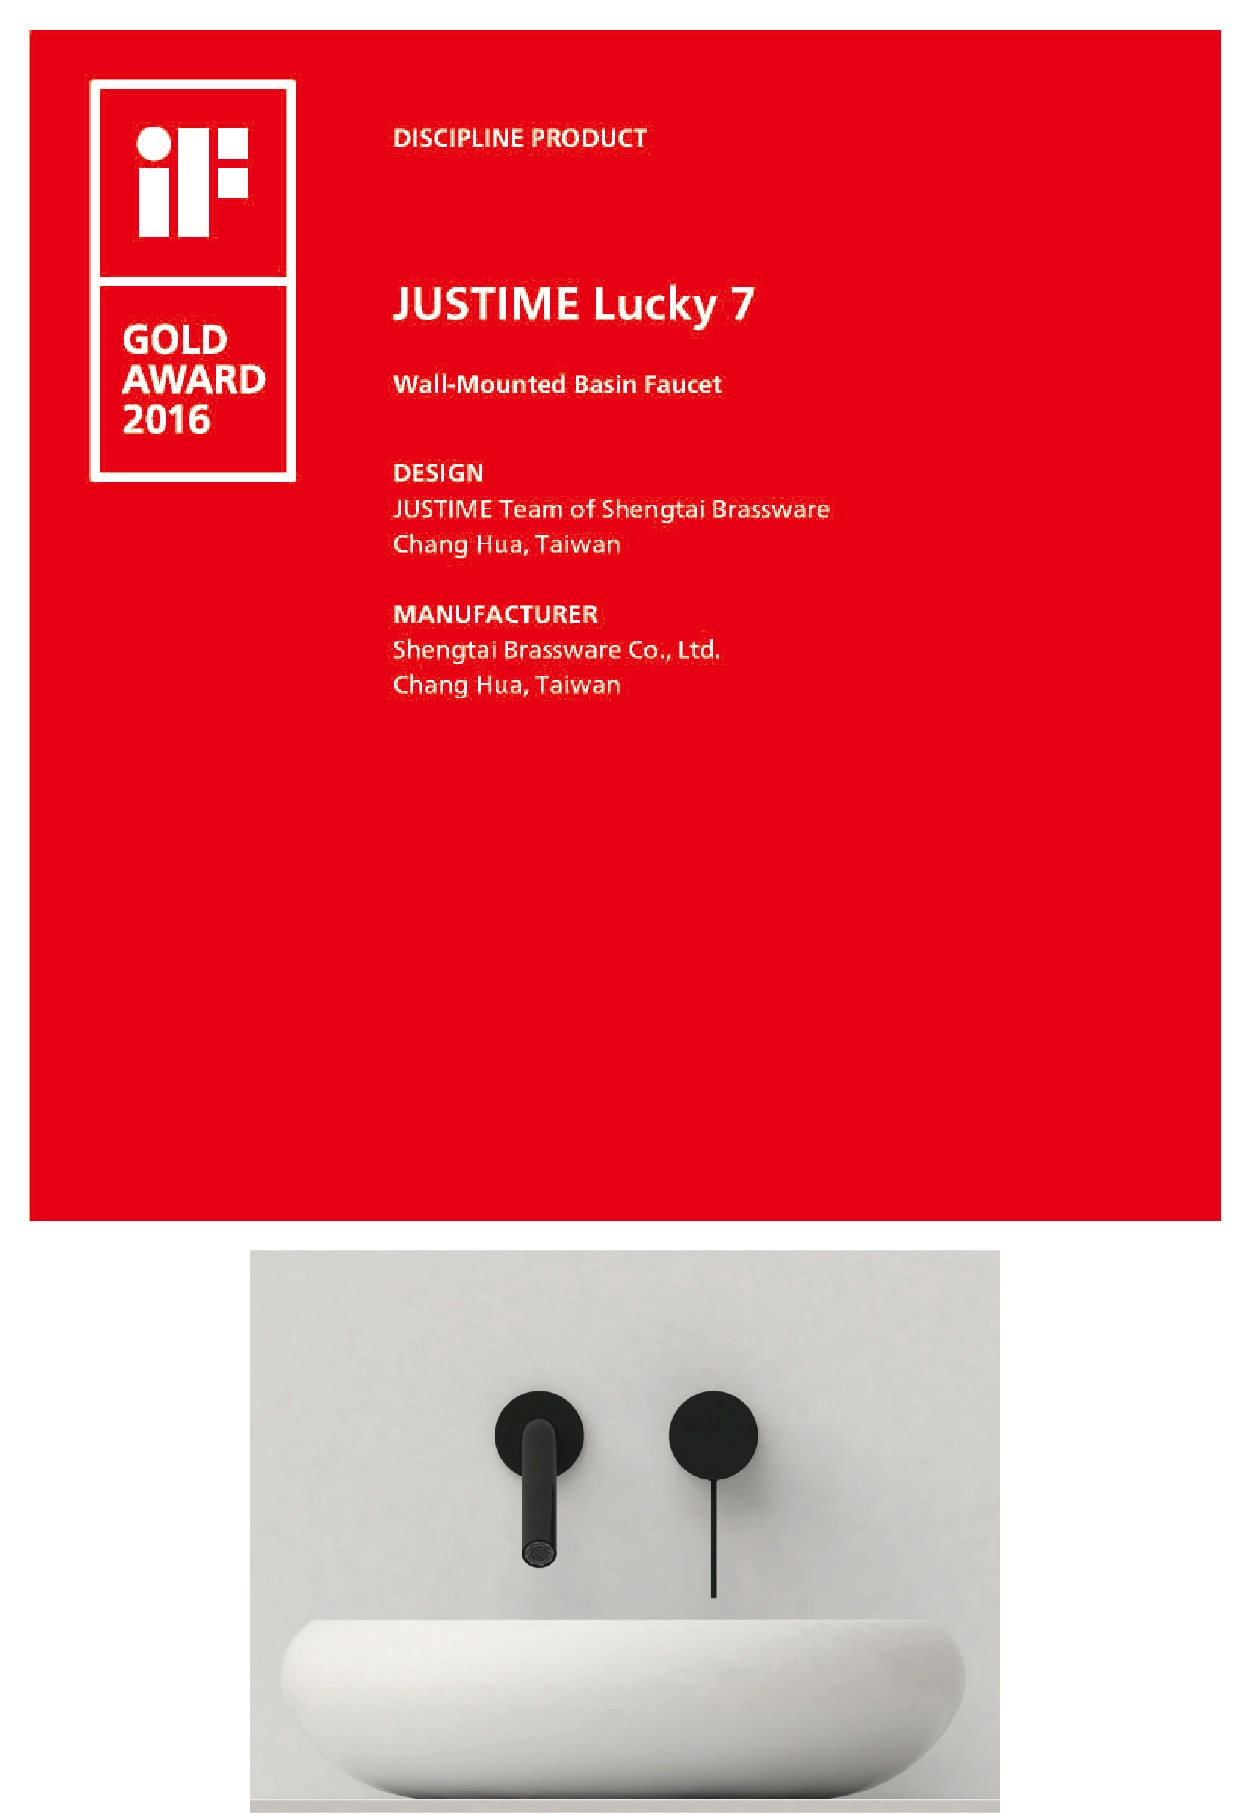 Great news to share with everyone, JUSTIME has won 5 iF product design awards in 2016